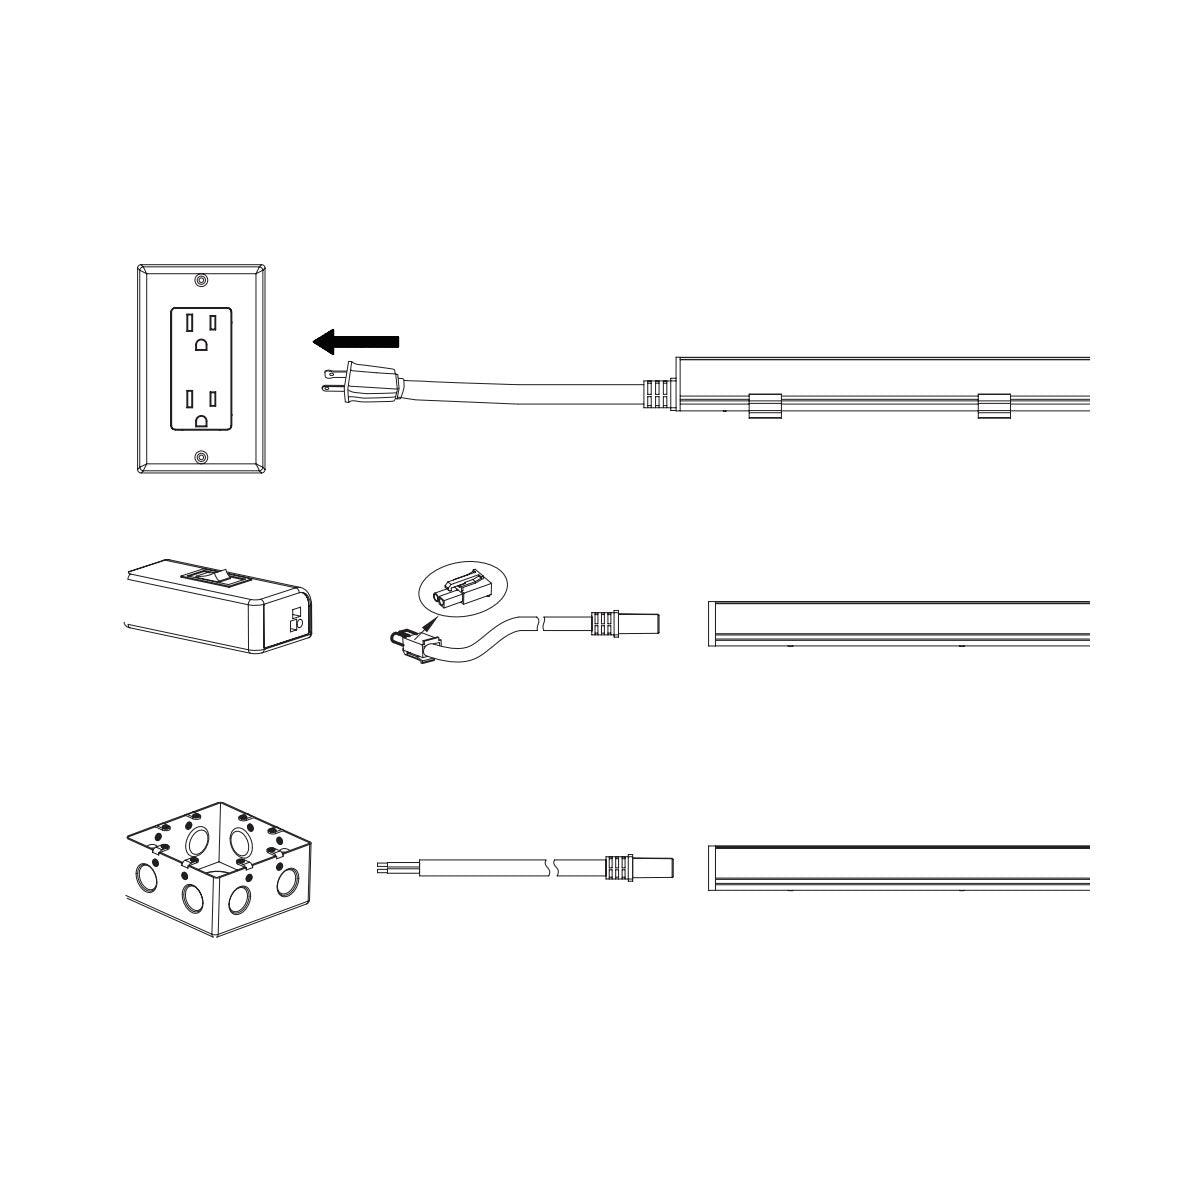 6ft Conkit, Power cable with Bare wire for Microlink Bar light